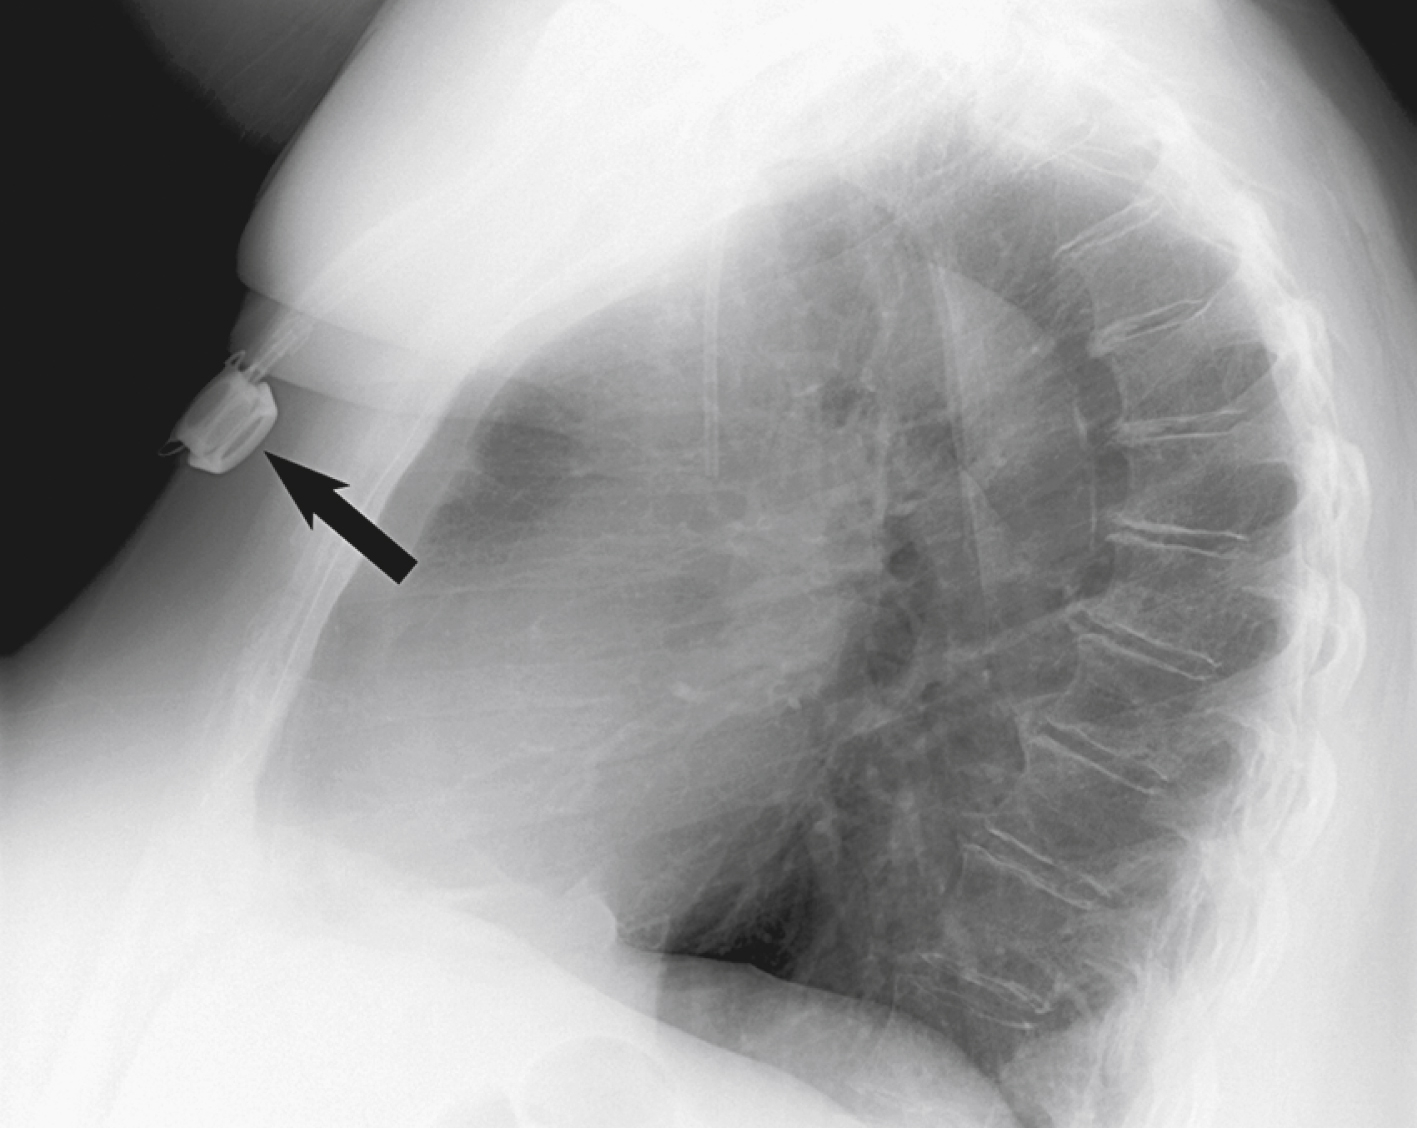 Fig. 85.5, Lateral chest radiograph showing that 2 weeks after insertion, this port had flipped 180 degrees within pocket. Diaphragm (arrow) is identified along deep margin of pocket. This port was manually flipped back into appropriate position (without opening pocket) and successfully accessed thereafter.